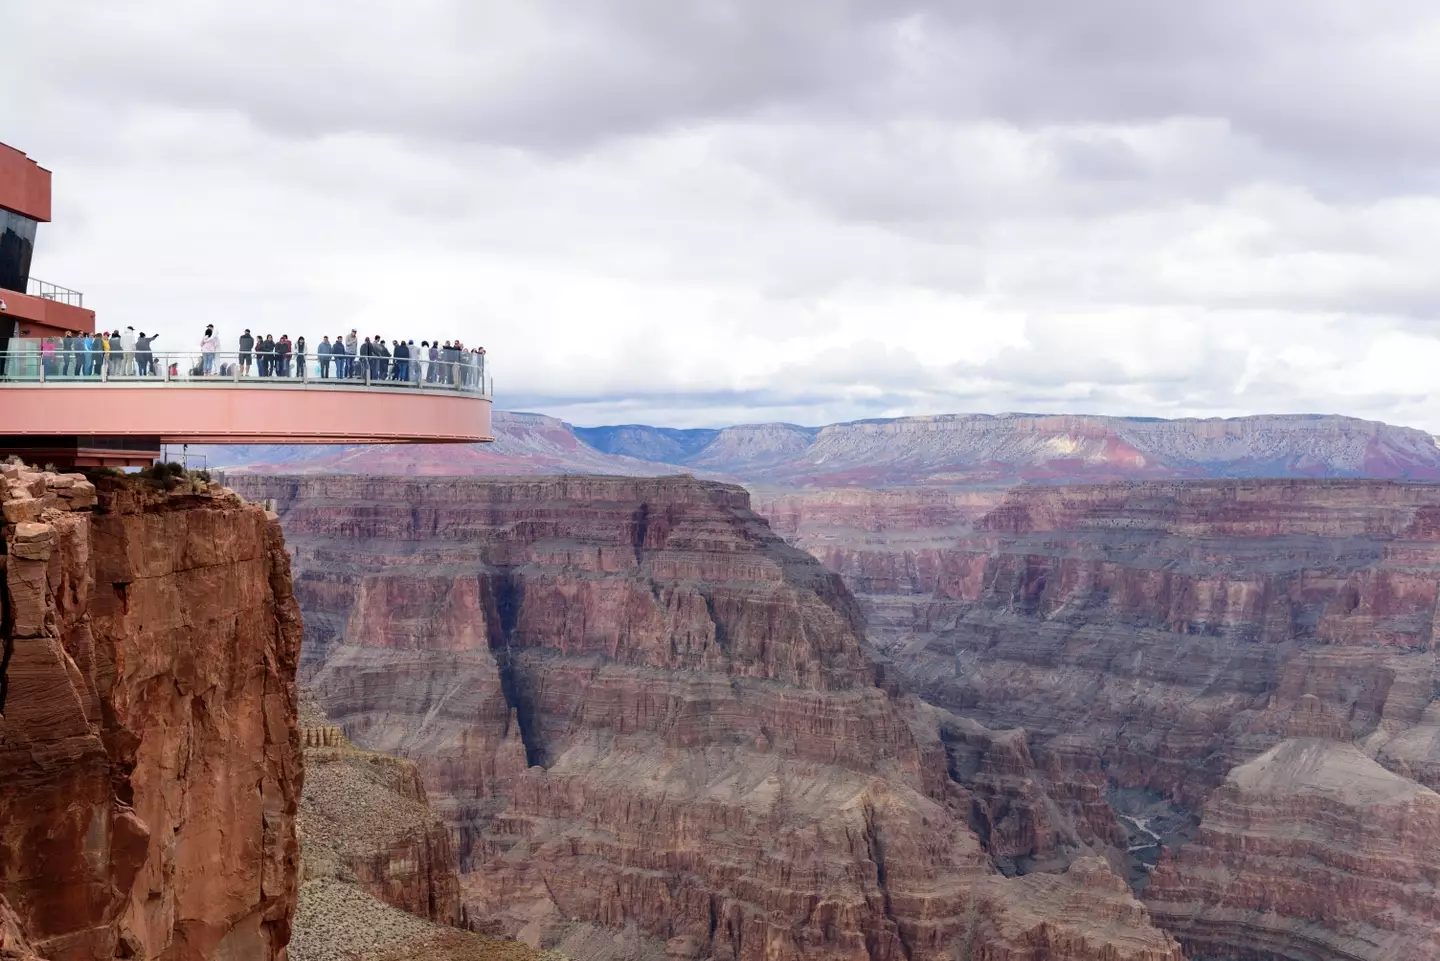 The Grand Canyon Skywalk is a popular tourist attraction.